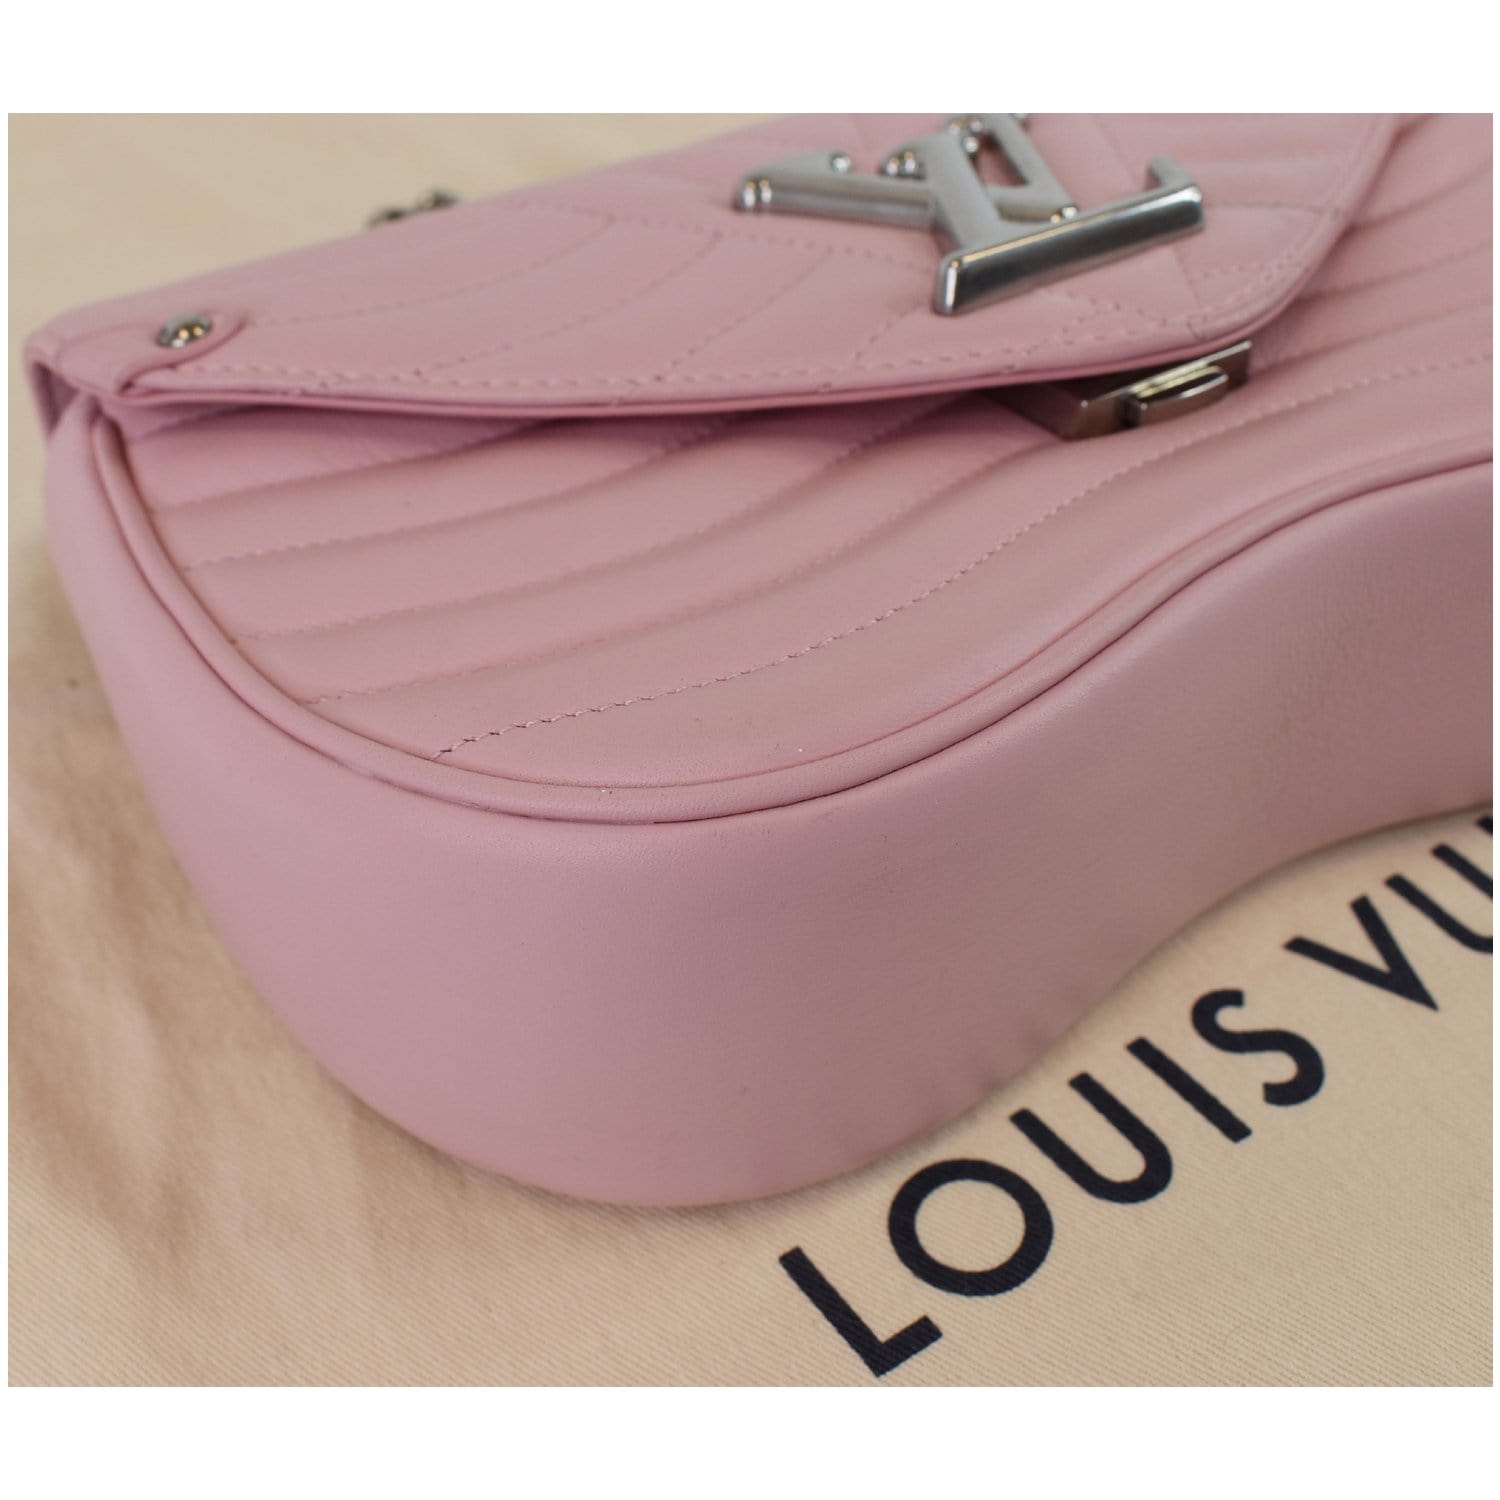 LOUIS VUITTON New Wave MM Chain Shoulder Bag Leather 2Way Pink M55020 Auth  24027